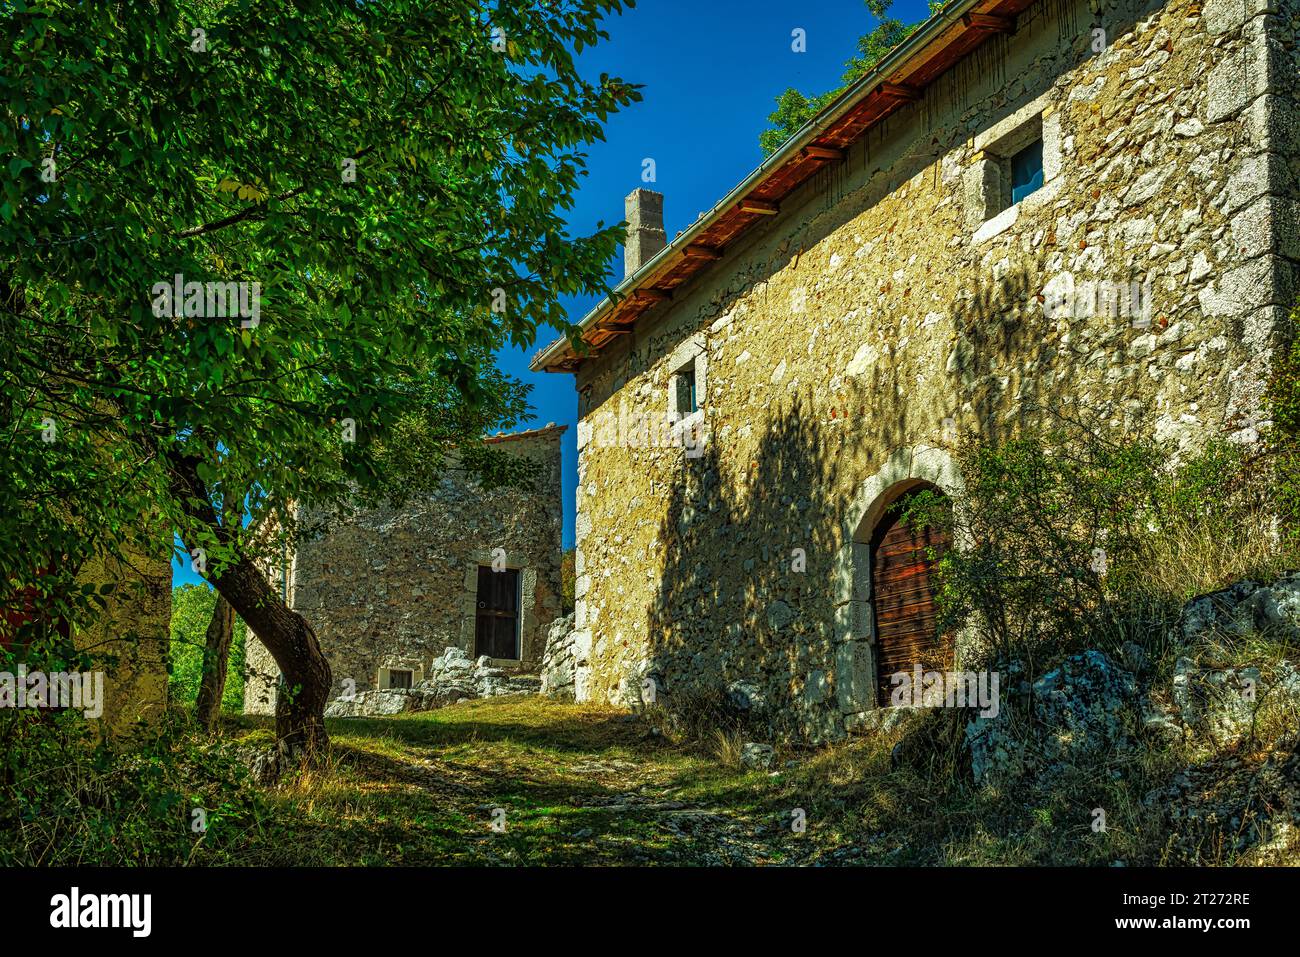 Ancient agricultural-pastoral mountain communities. Old stone houses. Pagliare di Fontecchio, province of L'Aquila, Abruzzo, Italy, Europe Stock Photo